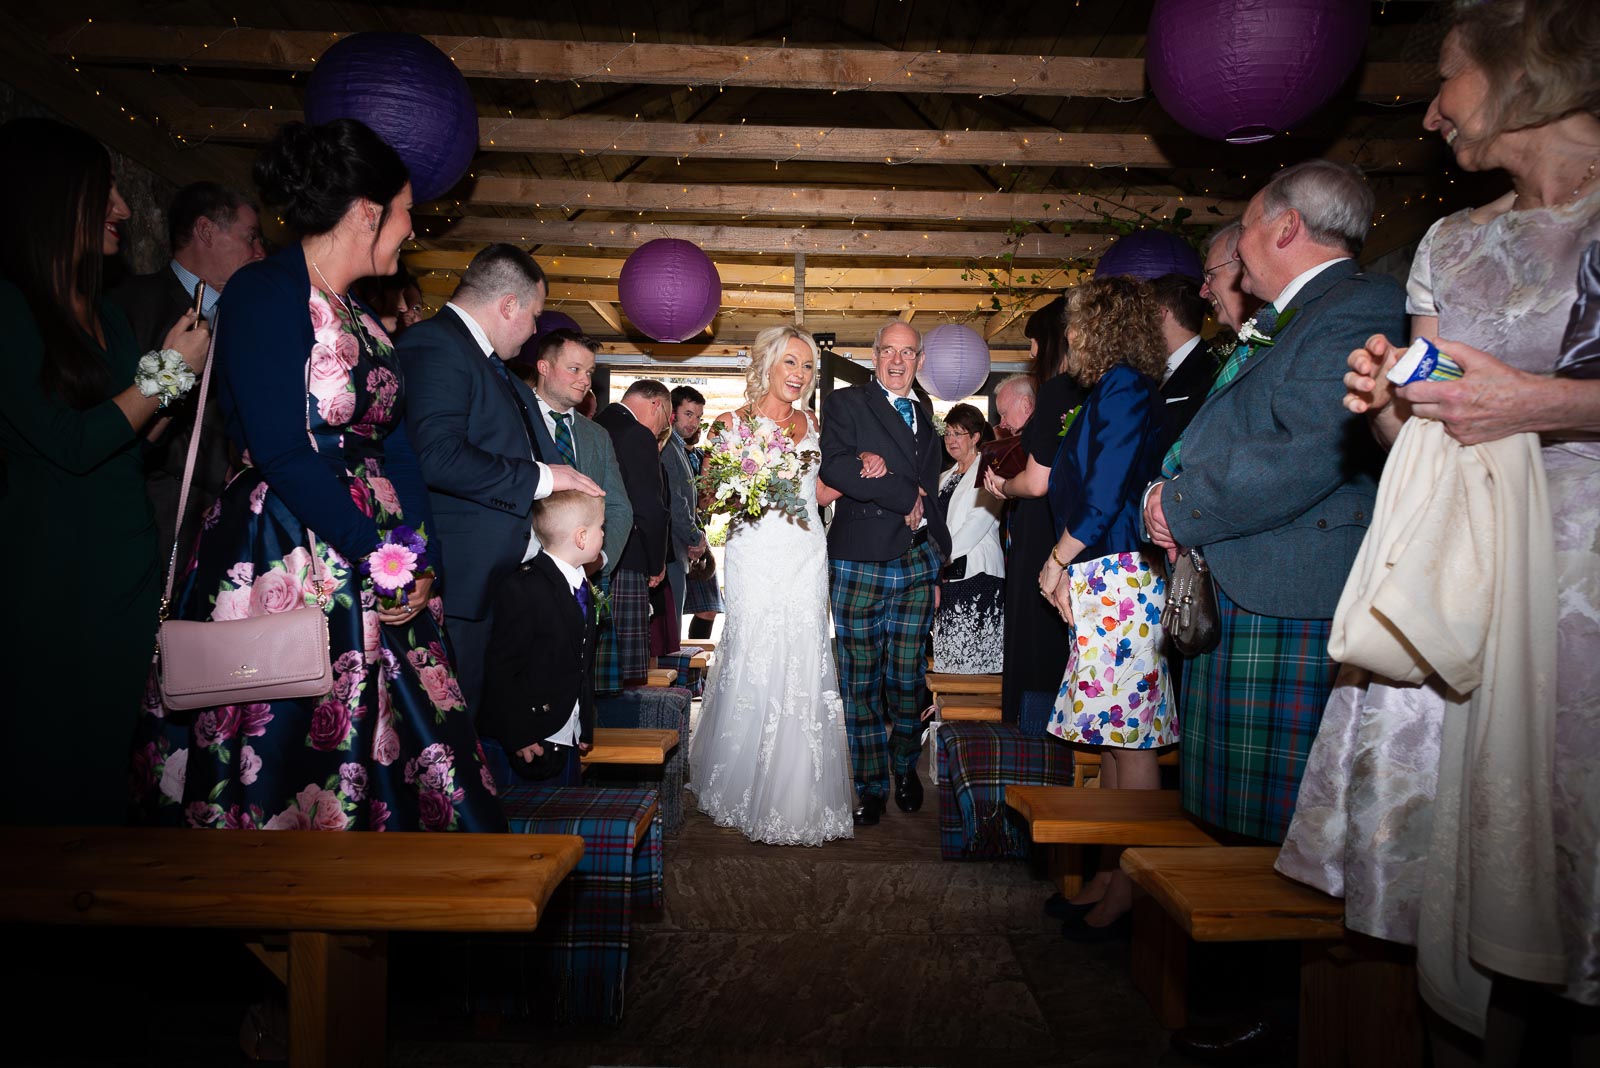 Eilidh walks down the aisle before her wedding to Lewis accompanied by her Dad.